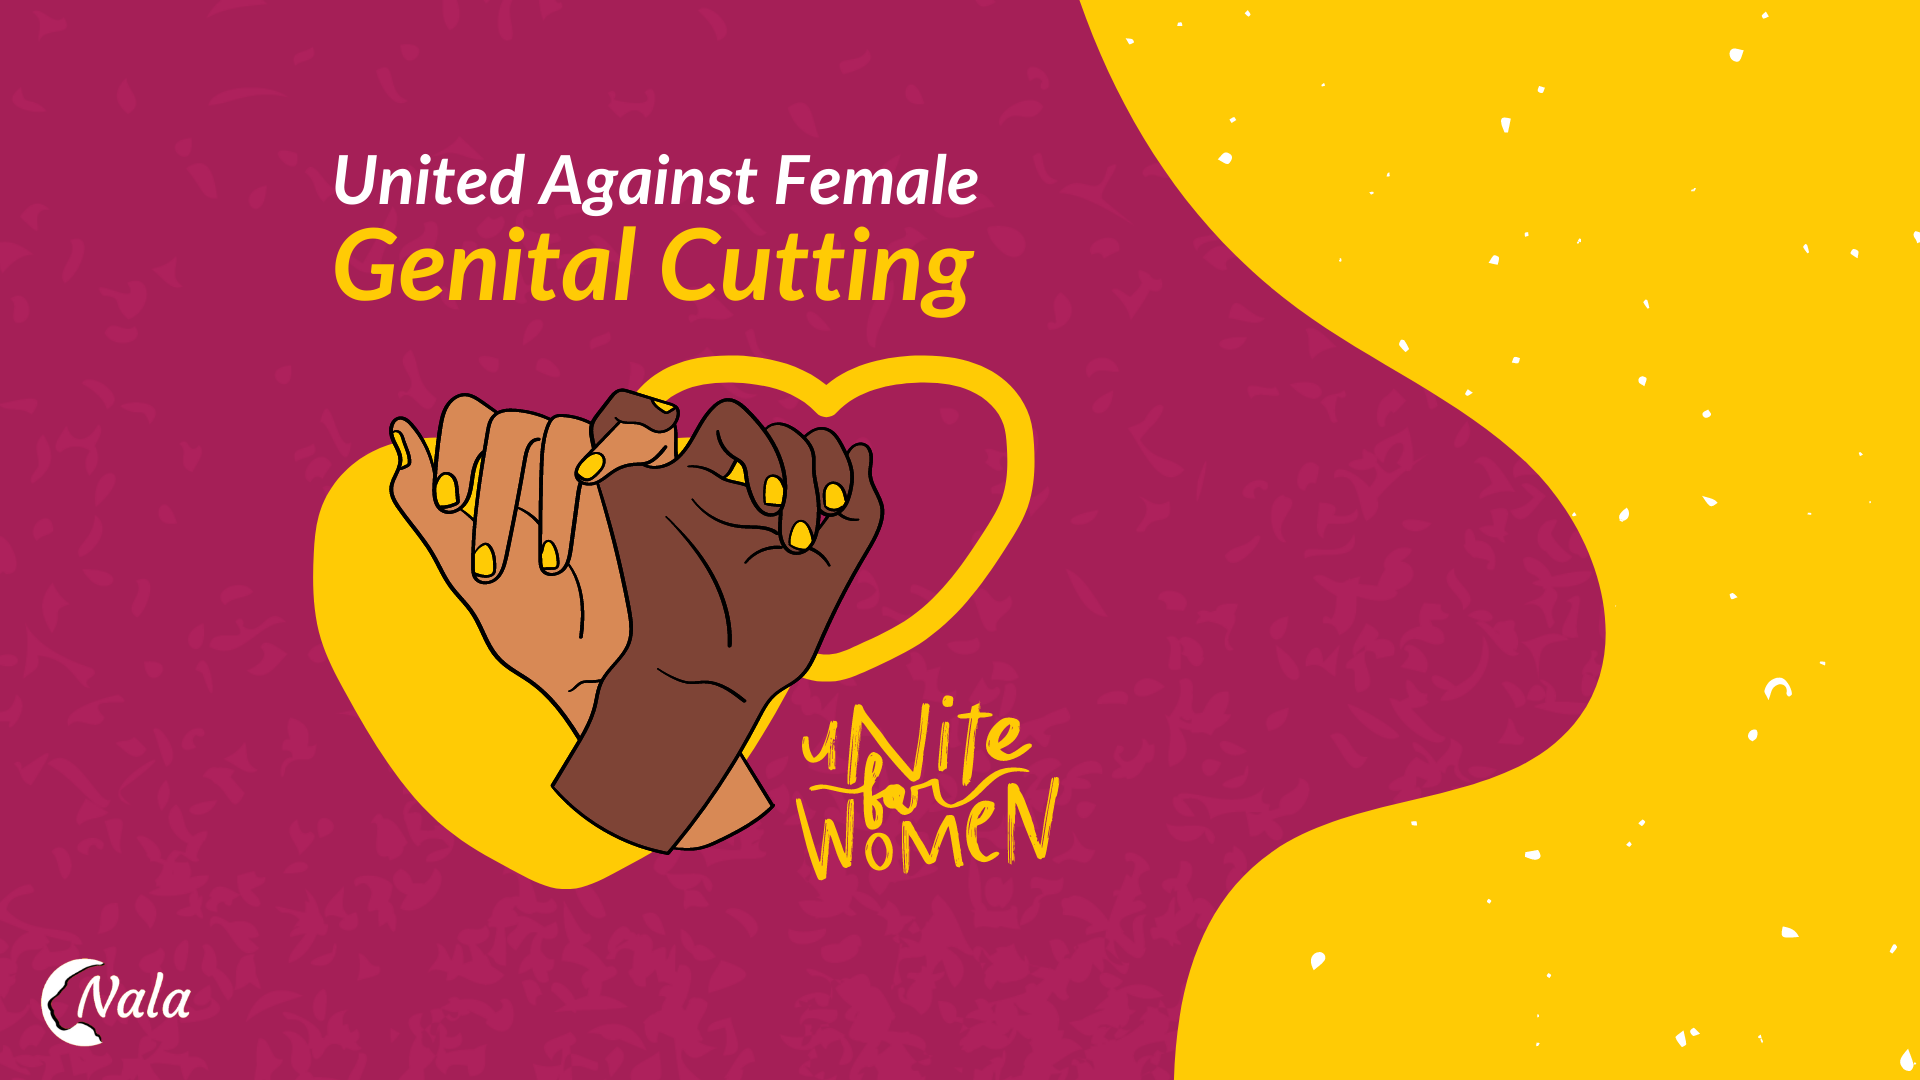 Introducing Nala Feminist Collective: African Women and The 10 Demands, including ending female genital cutting